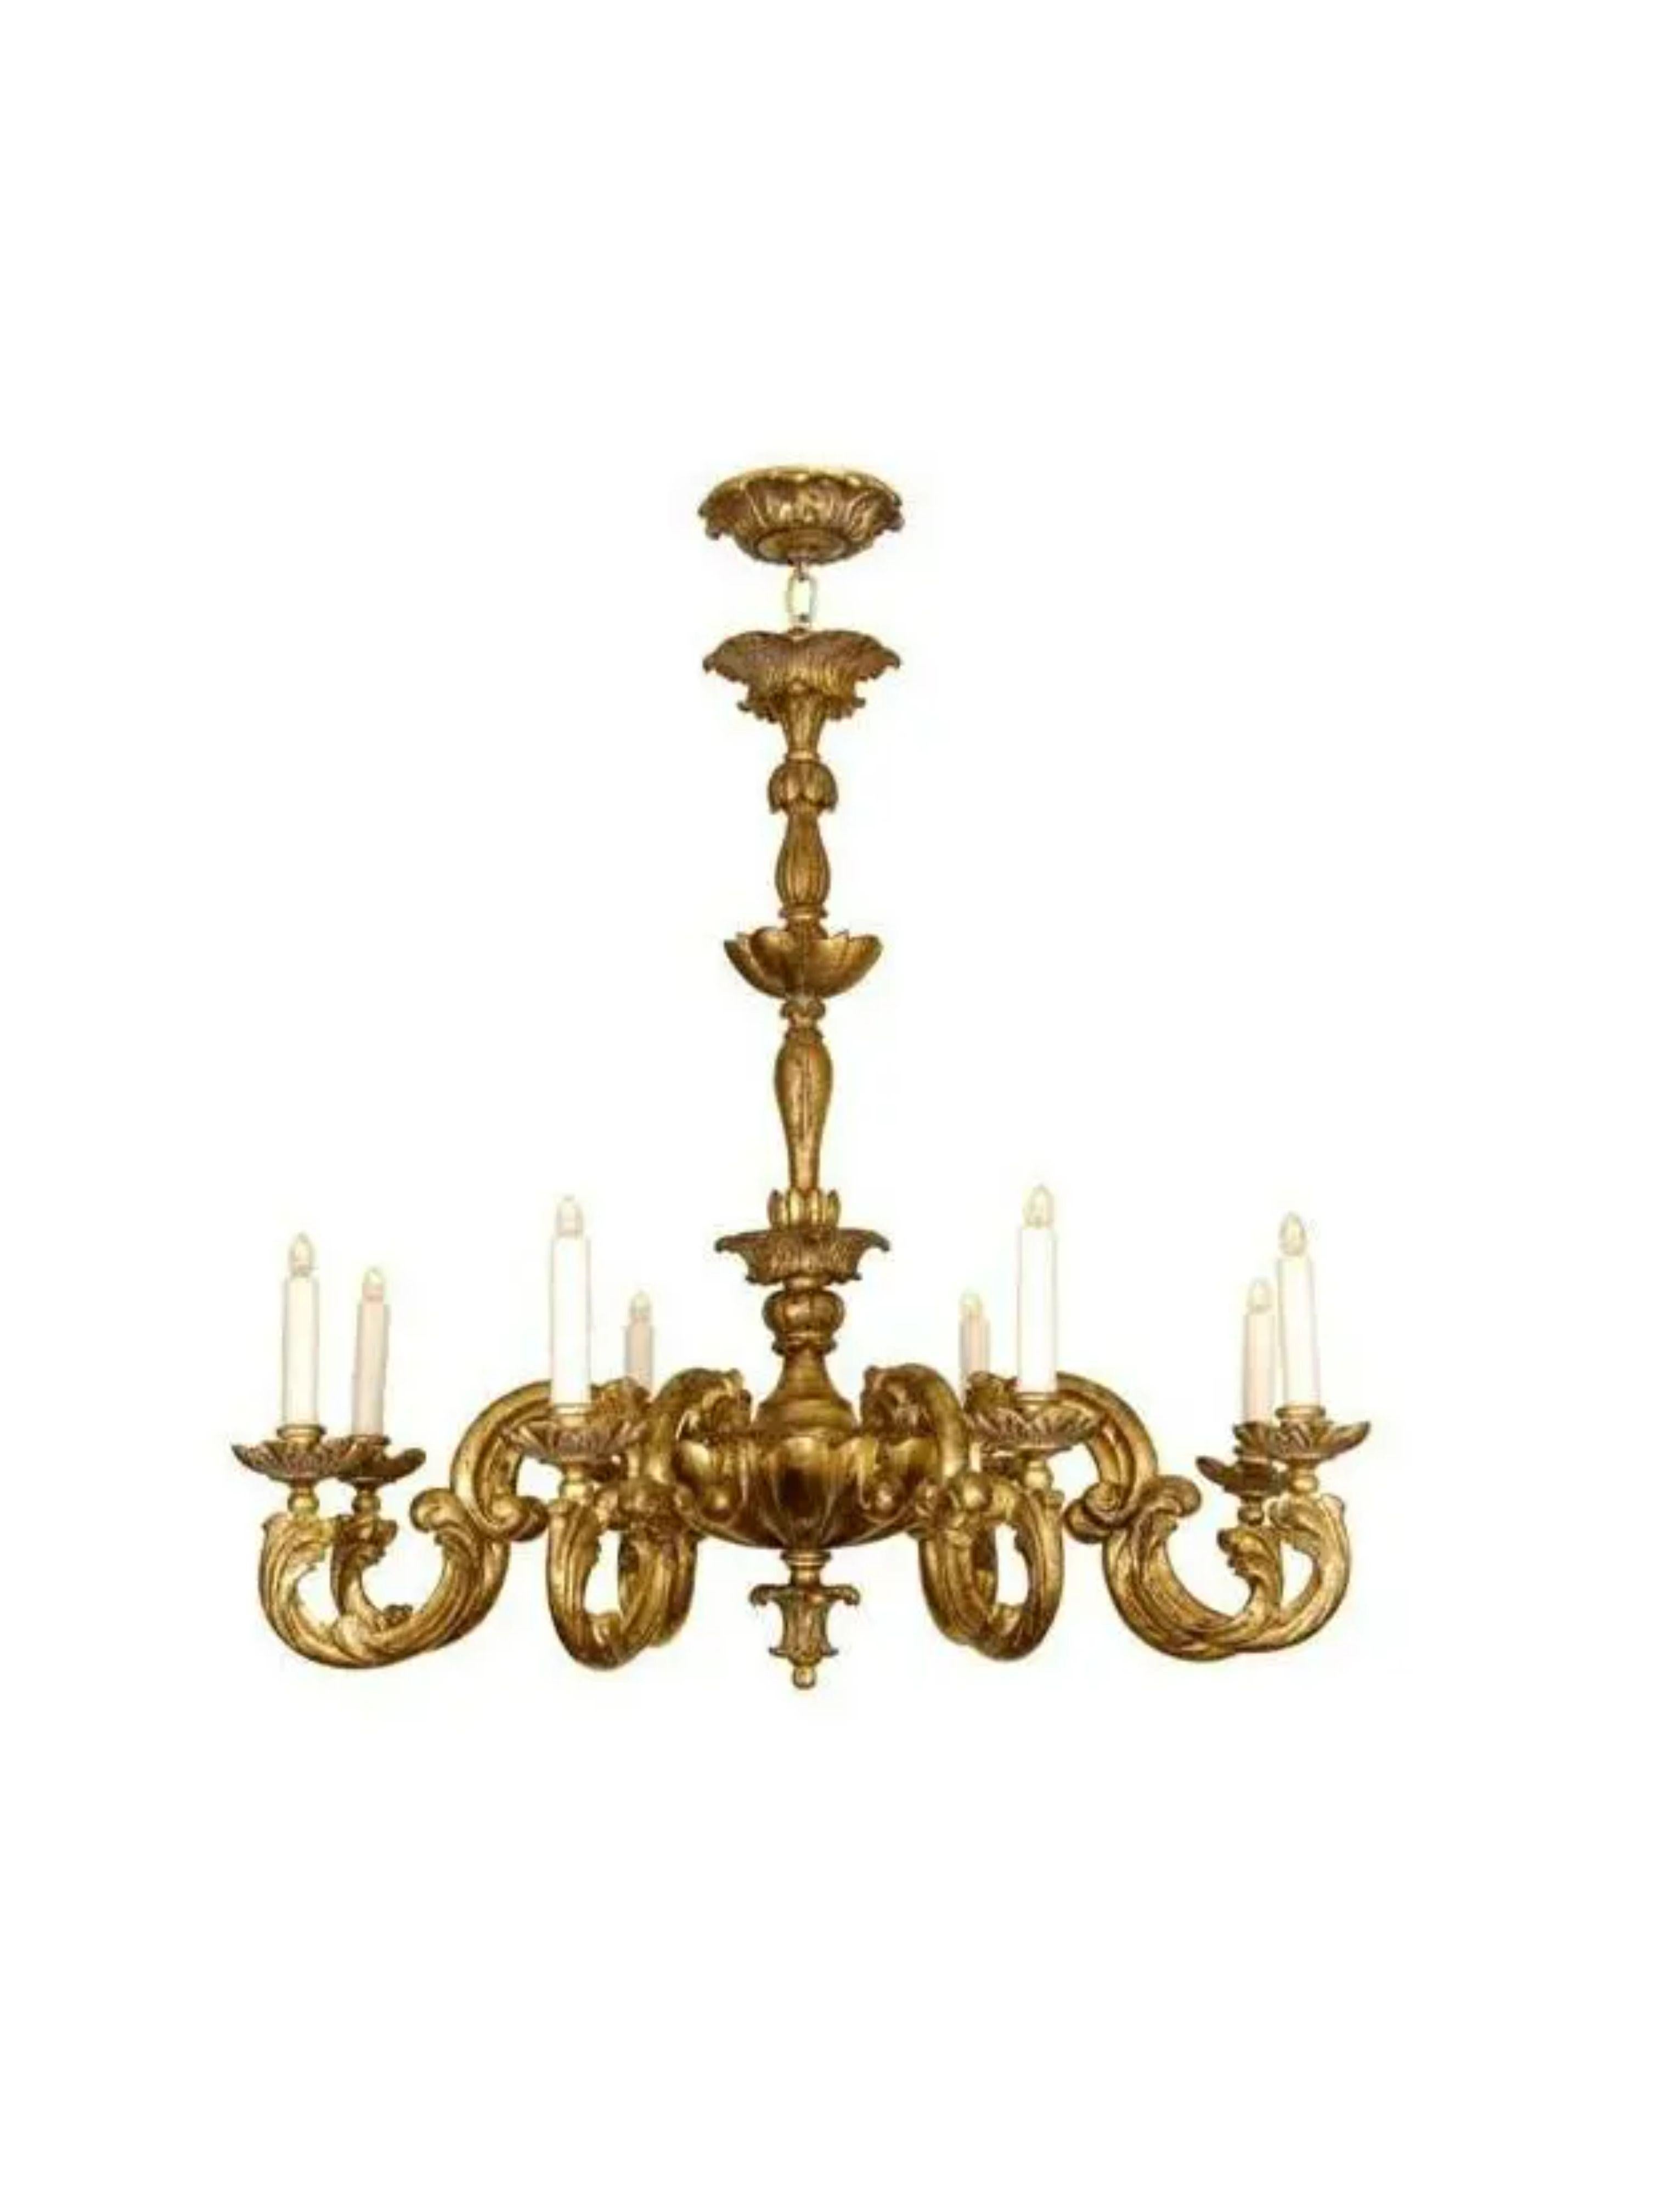 18th C Style Carved Italian Gilt Wood 8 Light Chandelier by Randy Esada for Prospr
Additional information: 
Materials: Lights, Wood
Color: Gold
Brand: Randy Esada Designs for Prospr
Designer: Randy Esada Designs for Prospr
Period: 2010s
Styles: